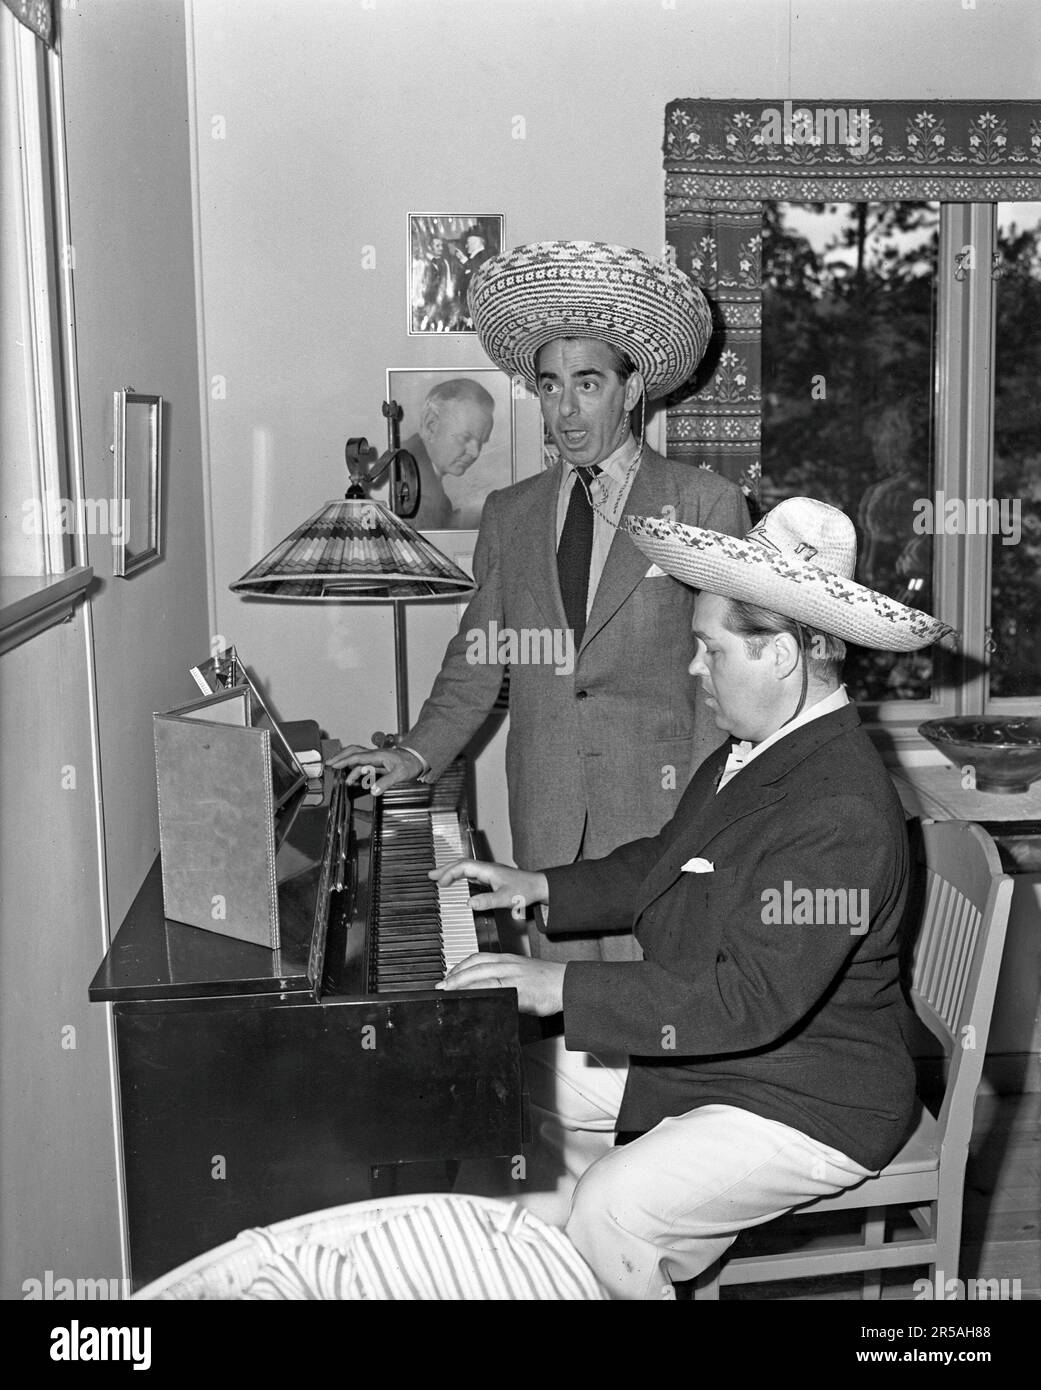 In the 1940s. Two men in mexican hats at a piano, one playing and one singing. They are operasinger Jussi Björling 1911-1969 playing, and the american moviestar Eddie Cantor. Sweden 1946  ref 218a-1 Stock Photo